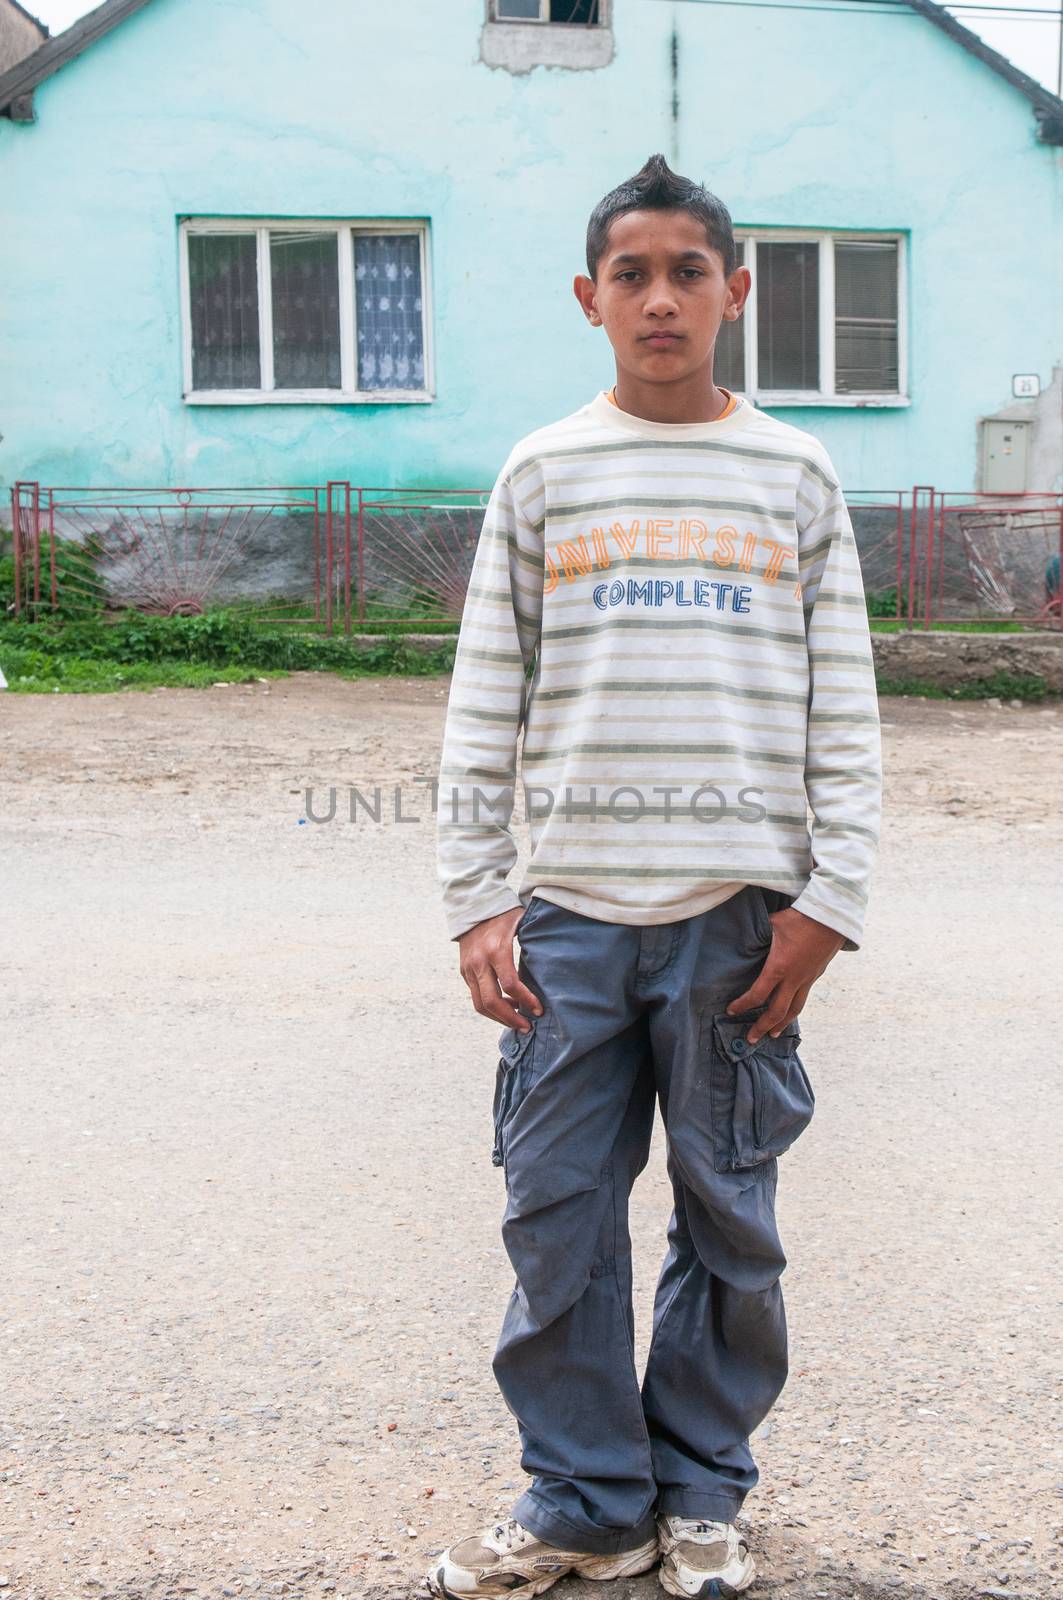 No opportunities for the Roma people in Slovakia. They suffer discrimination, poverty with no dignity. by gonzalobell